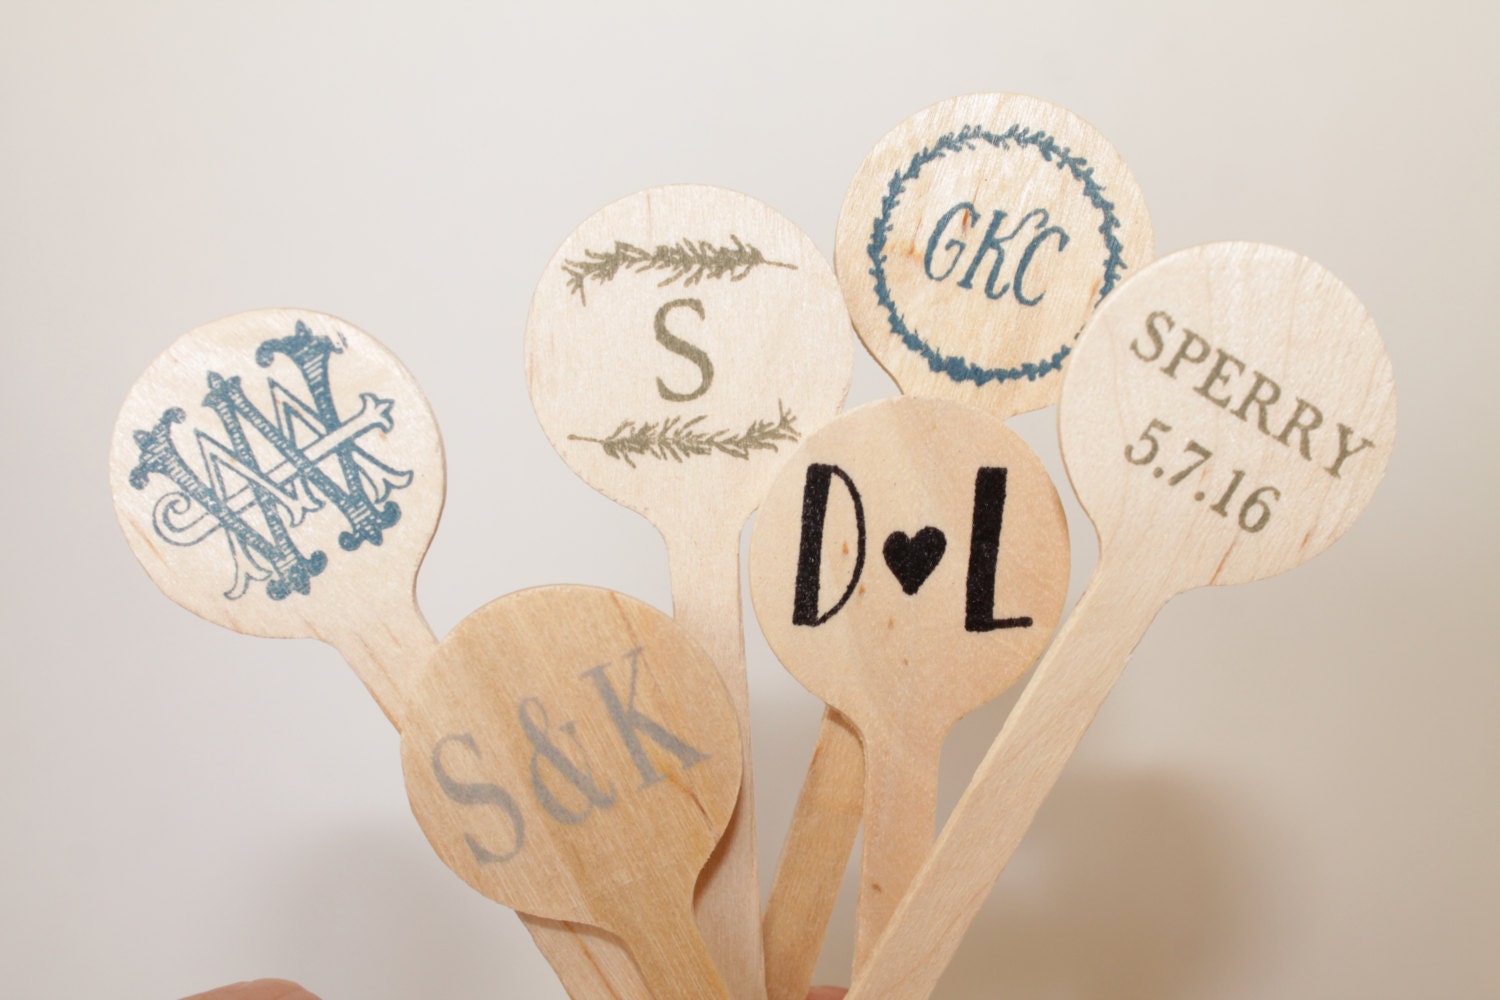 CUSTOM Wooden Drink Stirrers Great for Coffee Bars and Weddings